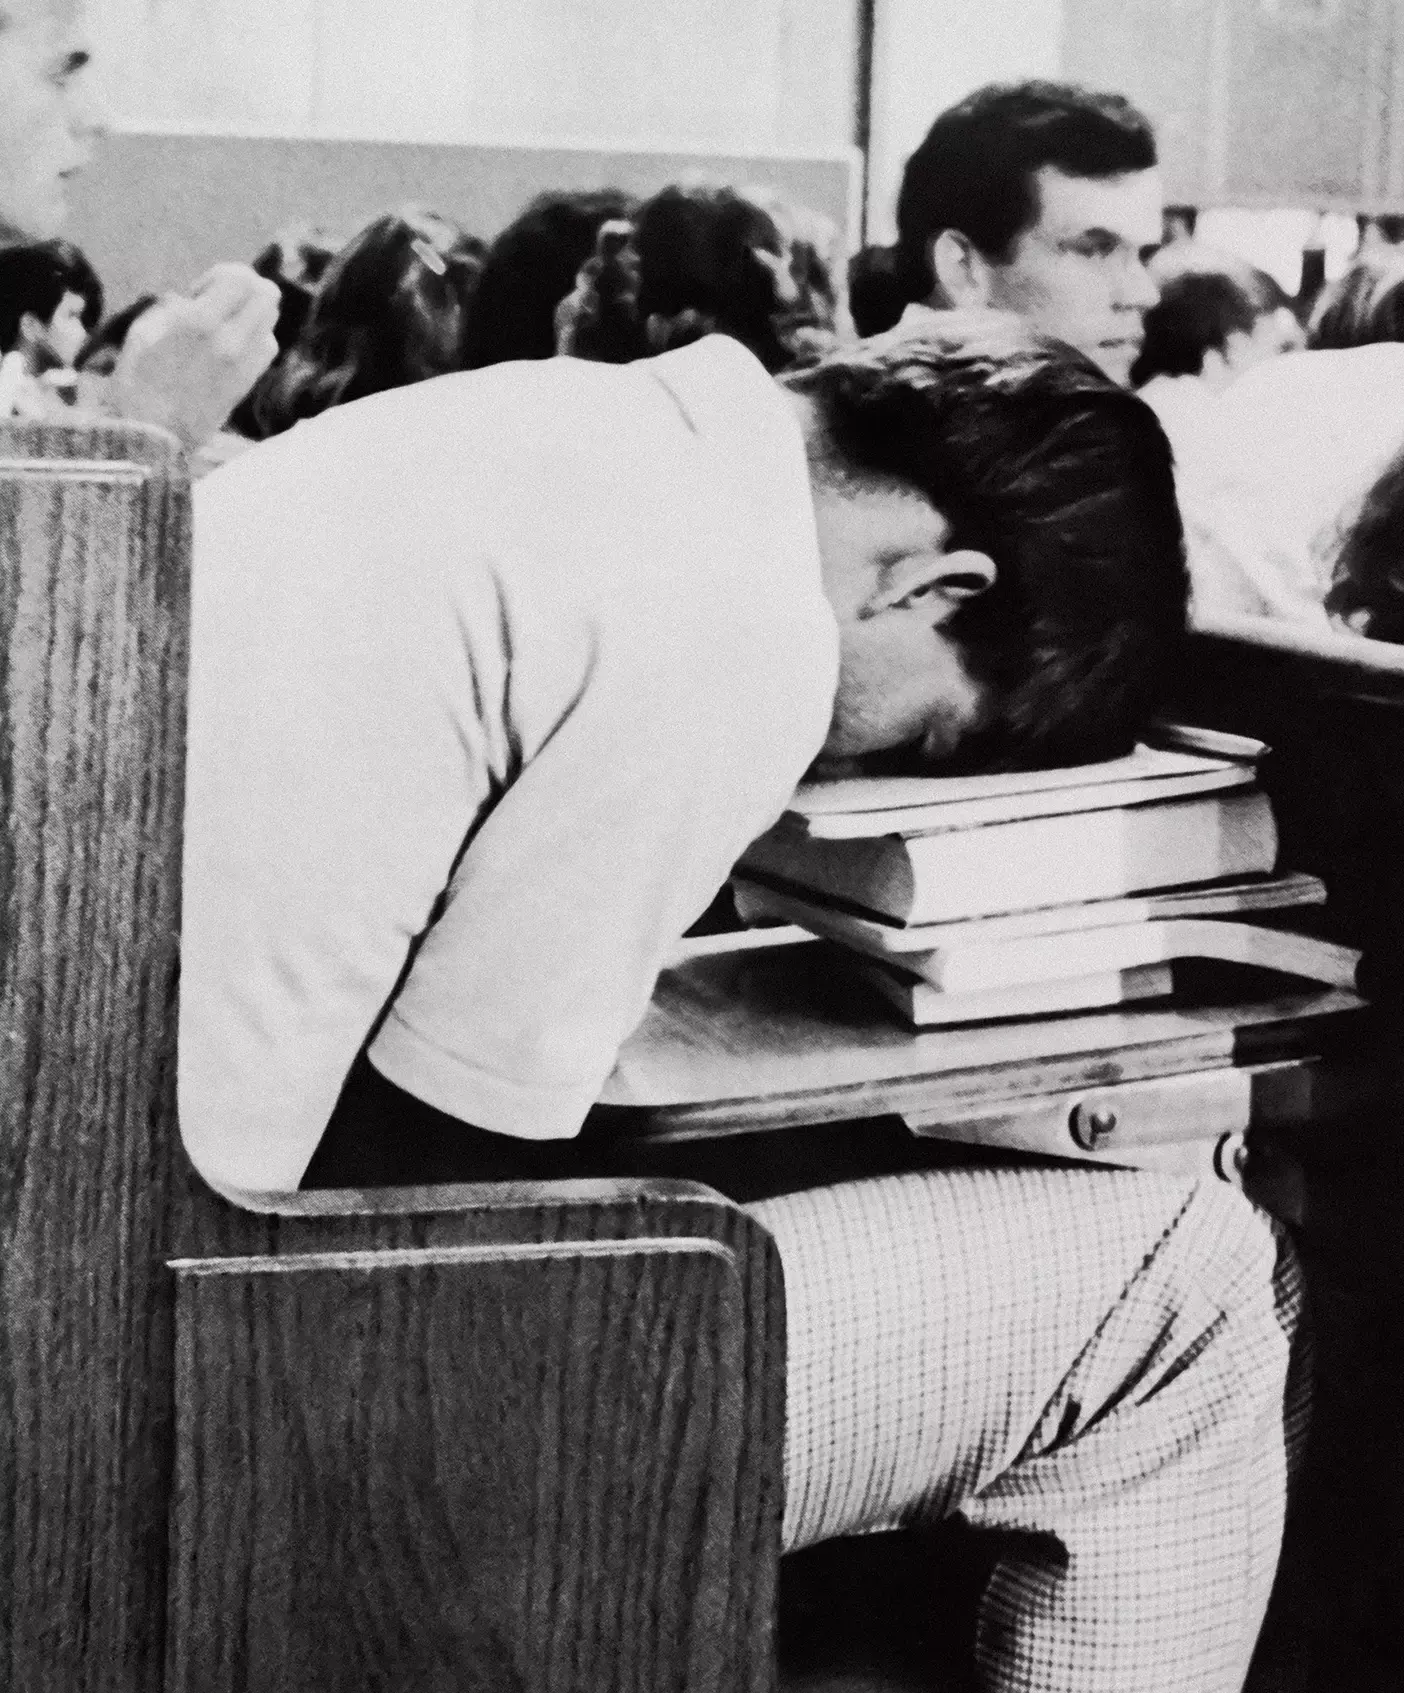 A student dressed in 1980s clothes sleeps on his desk in the Joseph Smith Building.